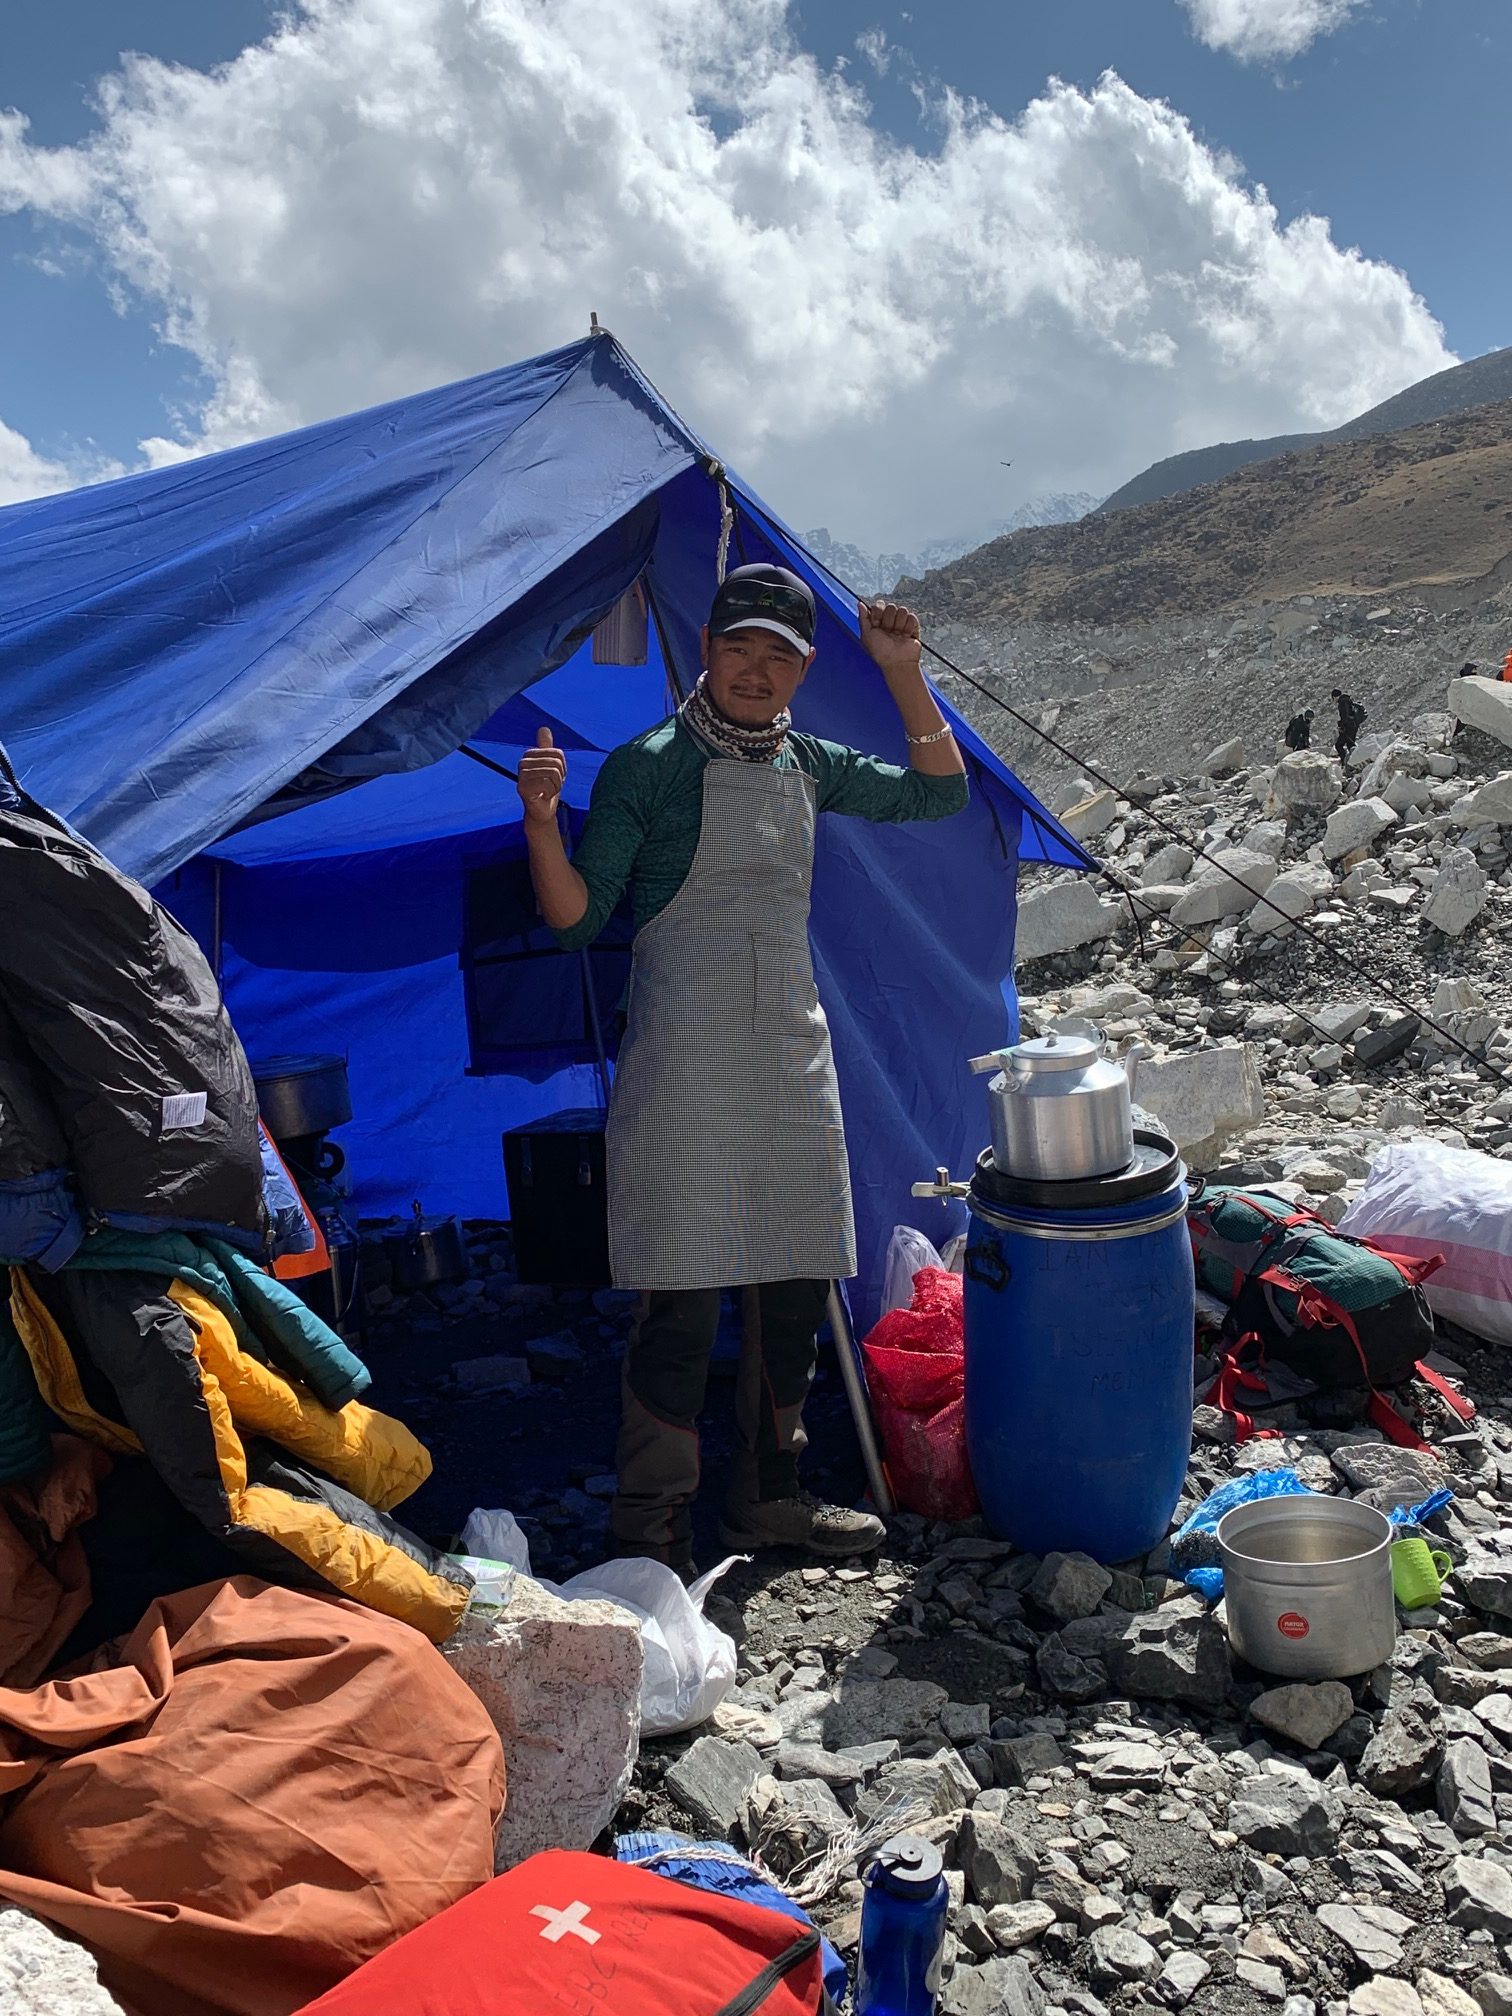 Cooking tent at Everest Base Camp